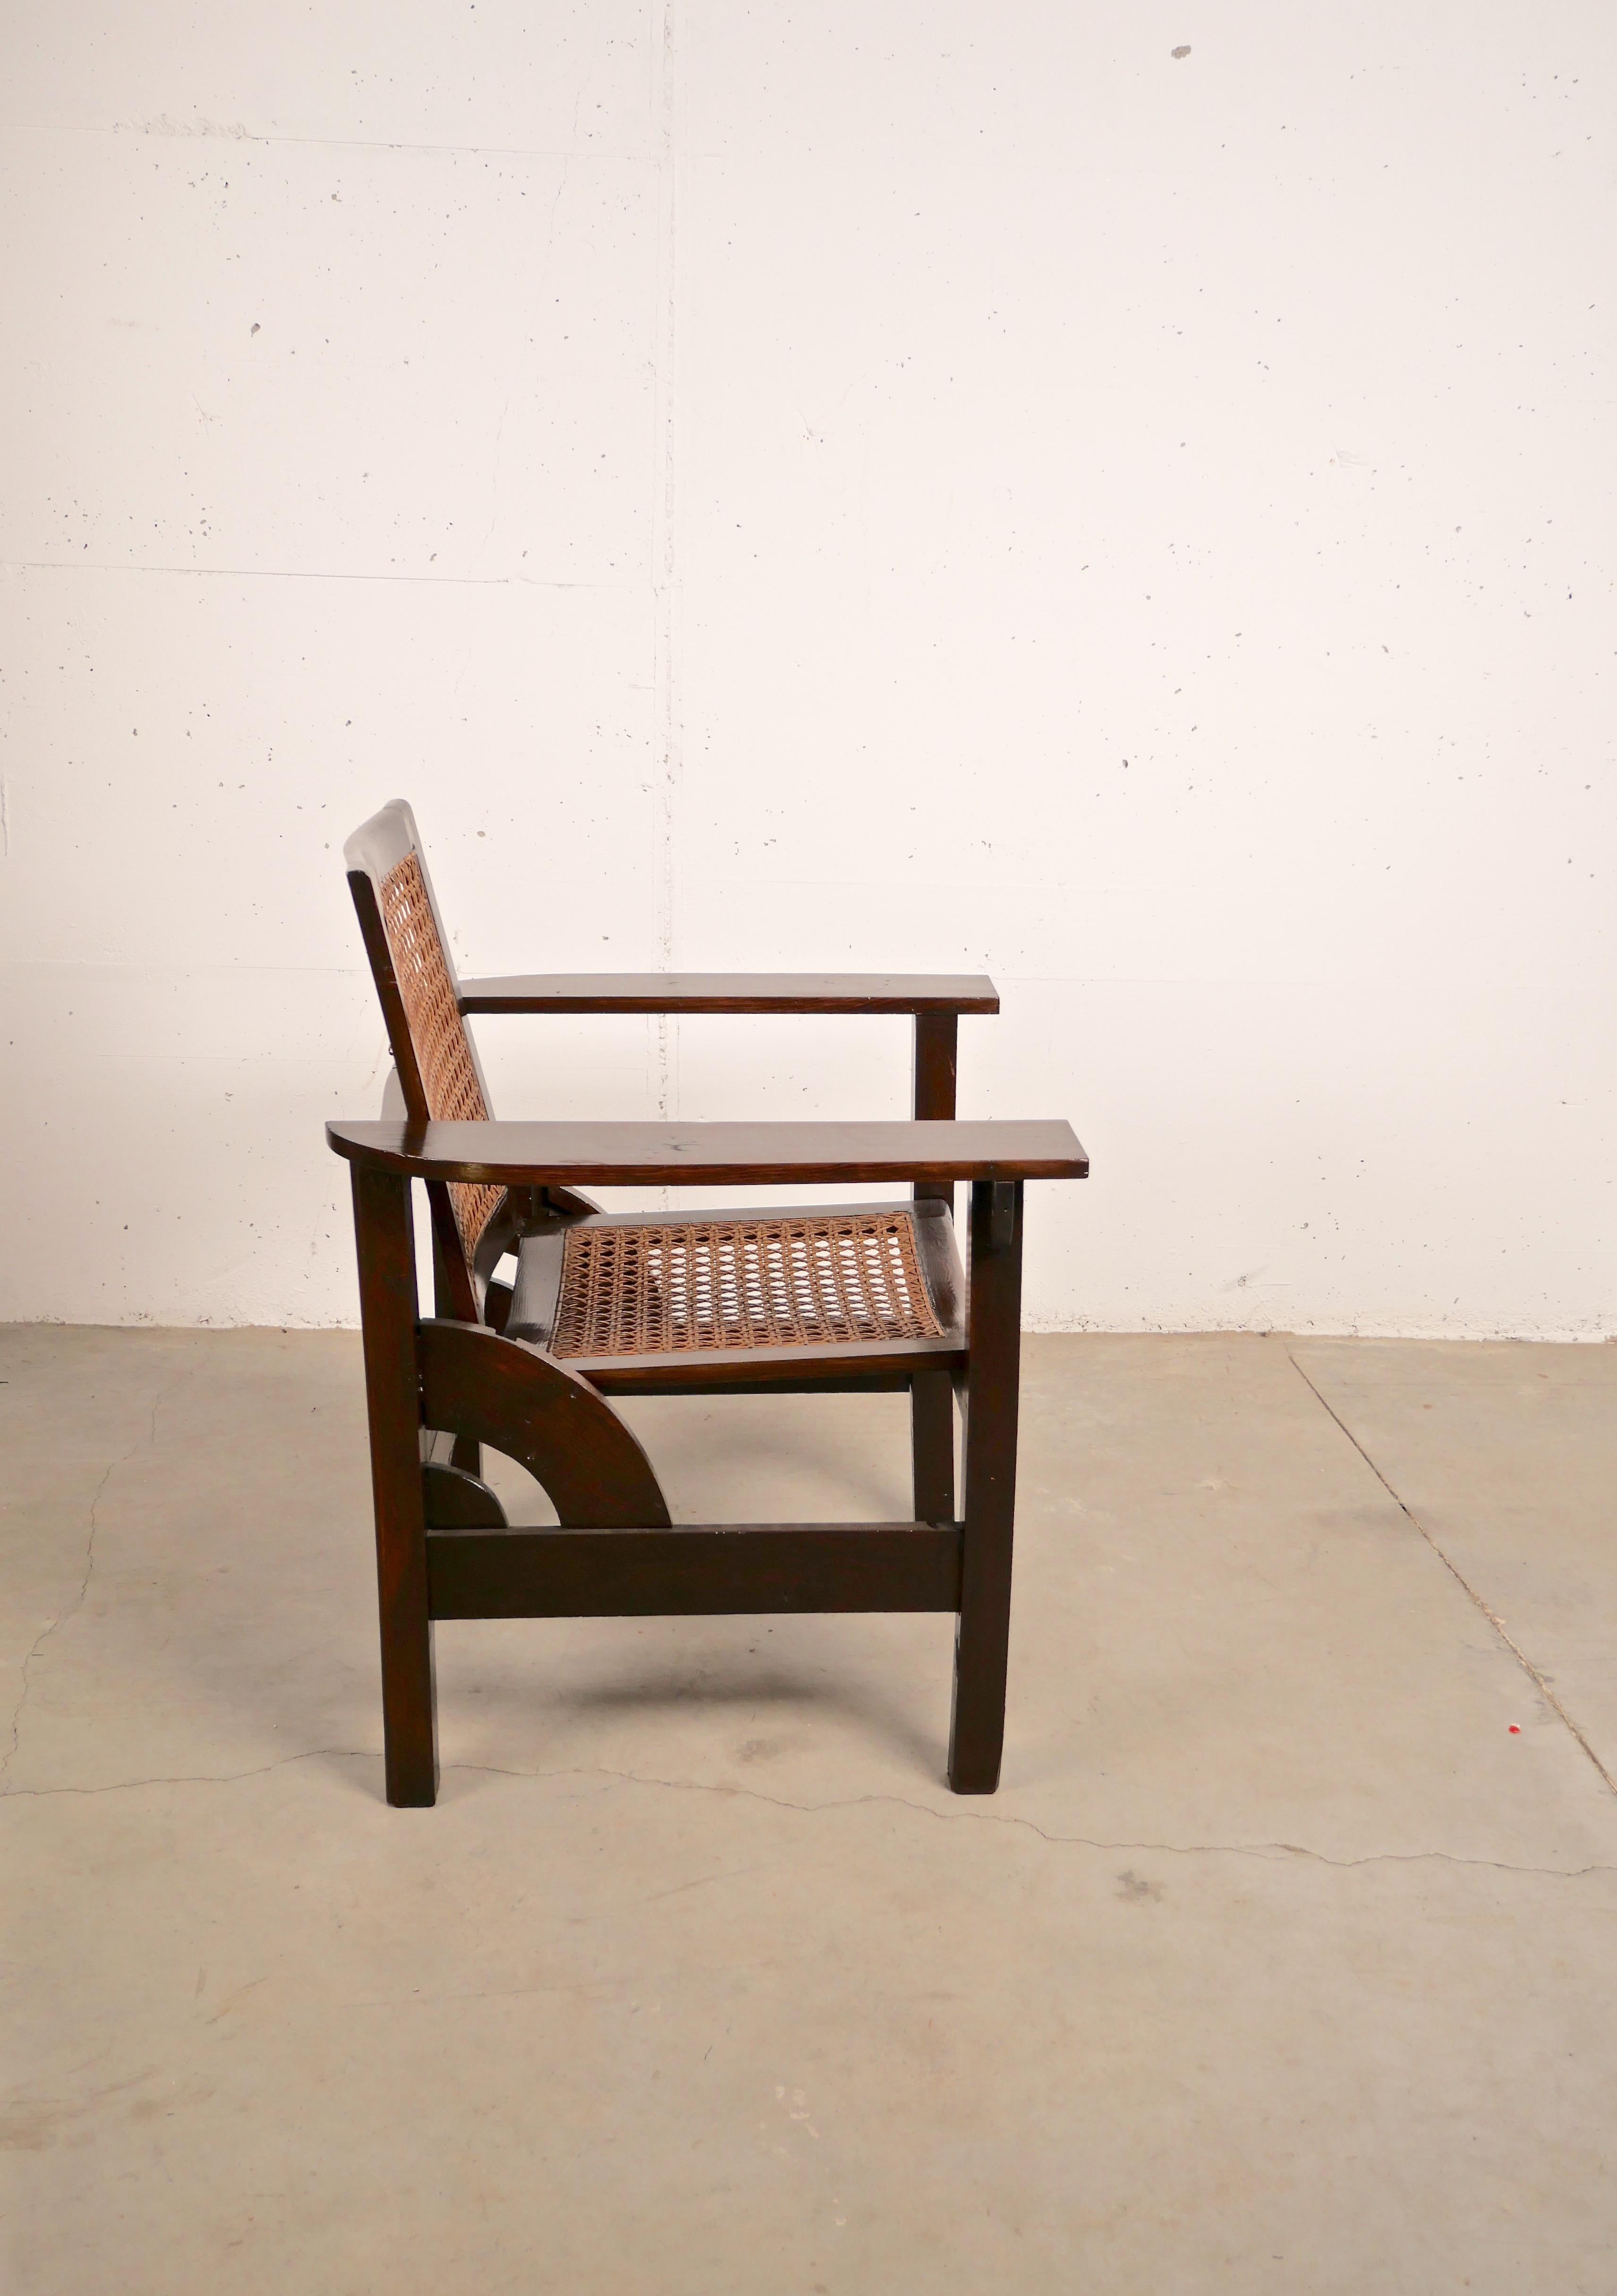 Hendaye Armchair in Walnut and Cane by Pierre Dariel, France, 1930 For Sale 1